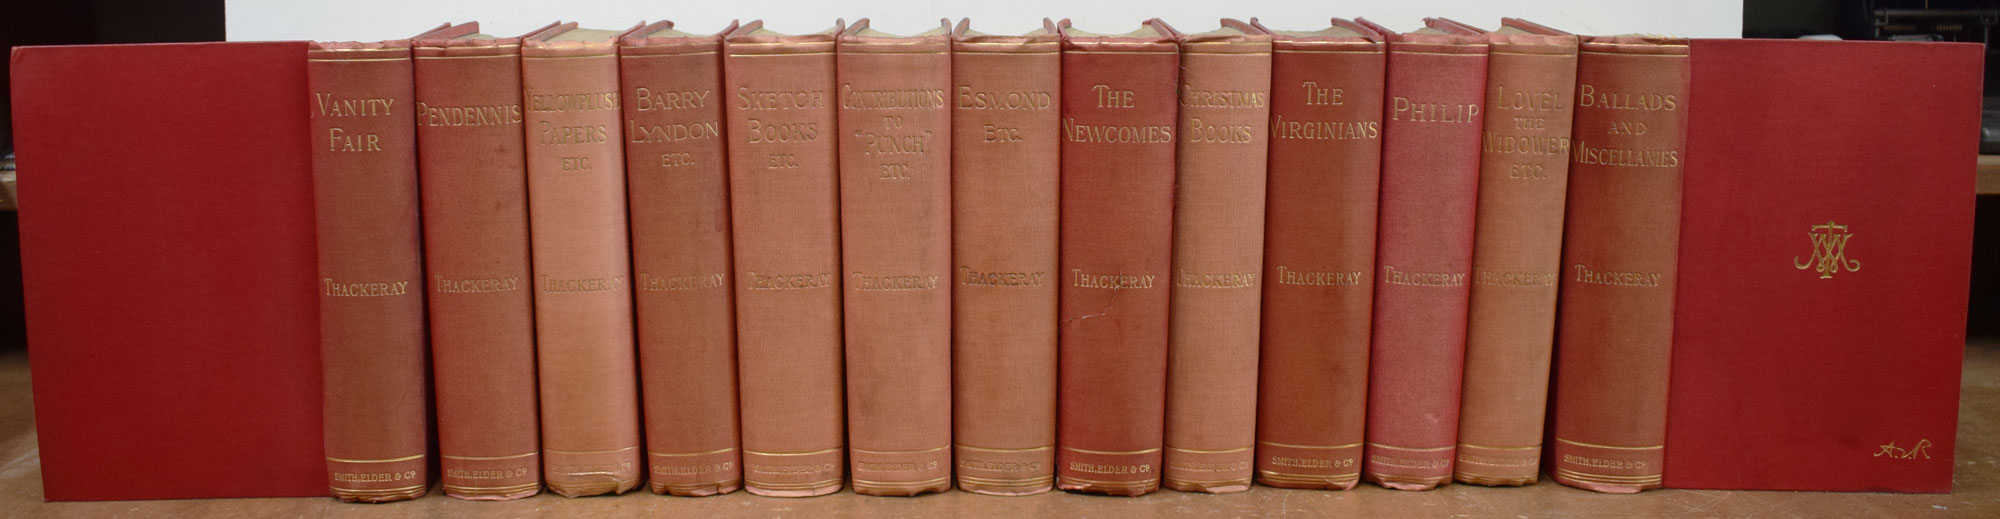 The Works of William Makepeace Thackeray with Biographical Introduction by his Daughter, Anne Ritchie. Smith, Elder, & Co editions. Complete 13 volume set.